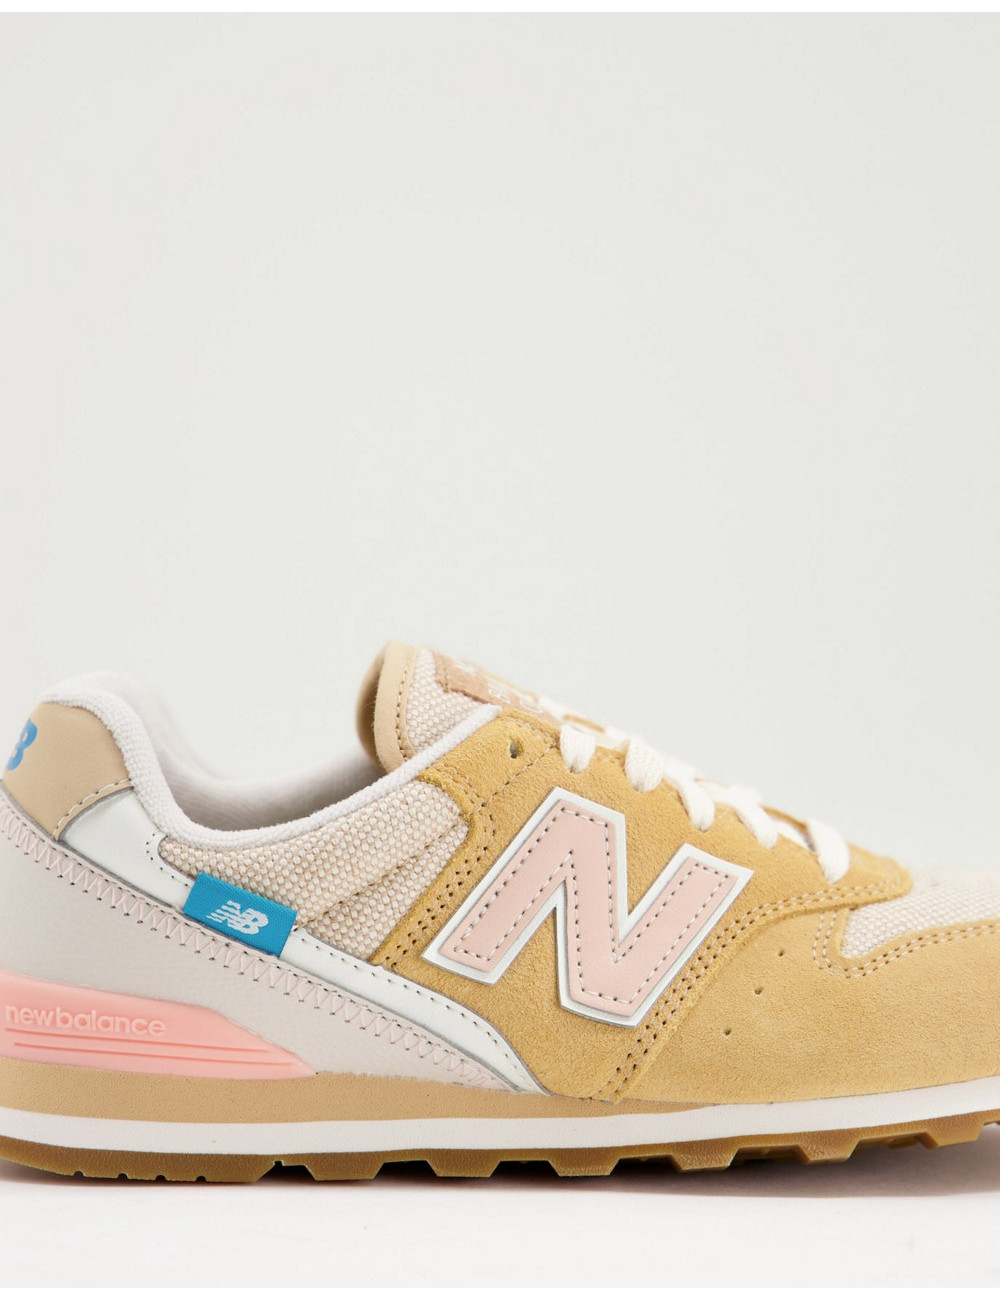 New Balance 996 trainer in tan